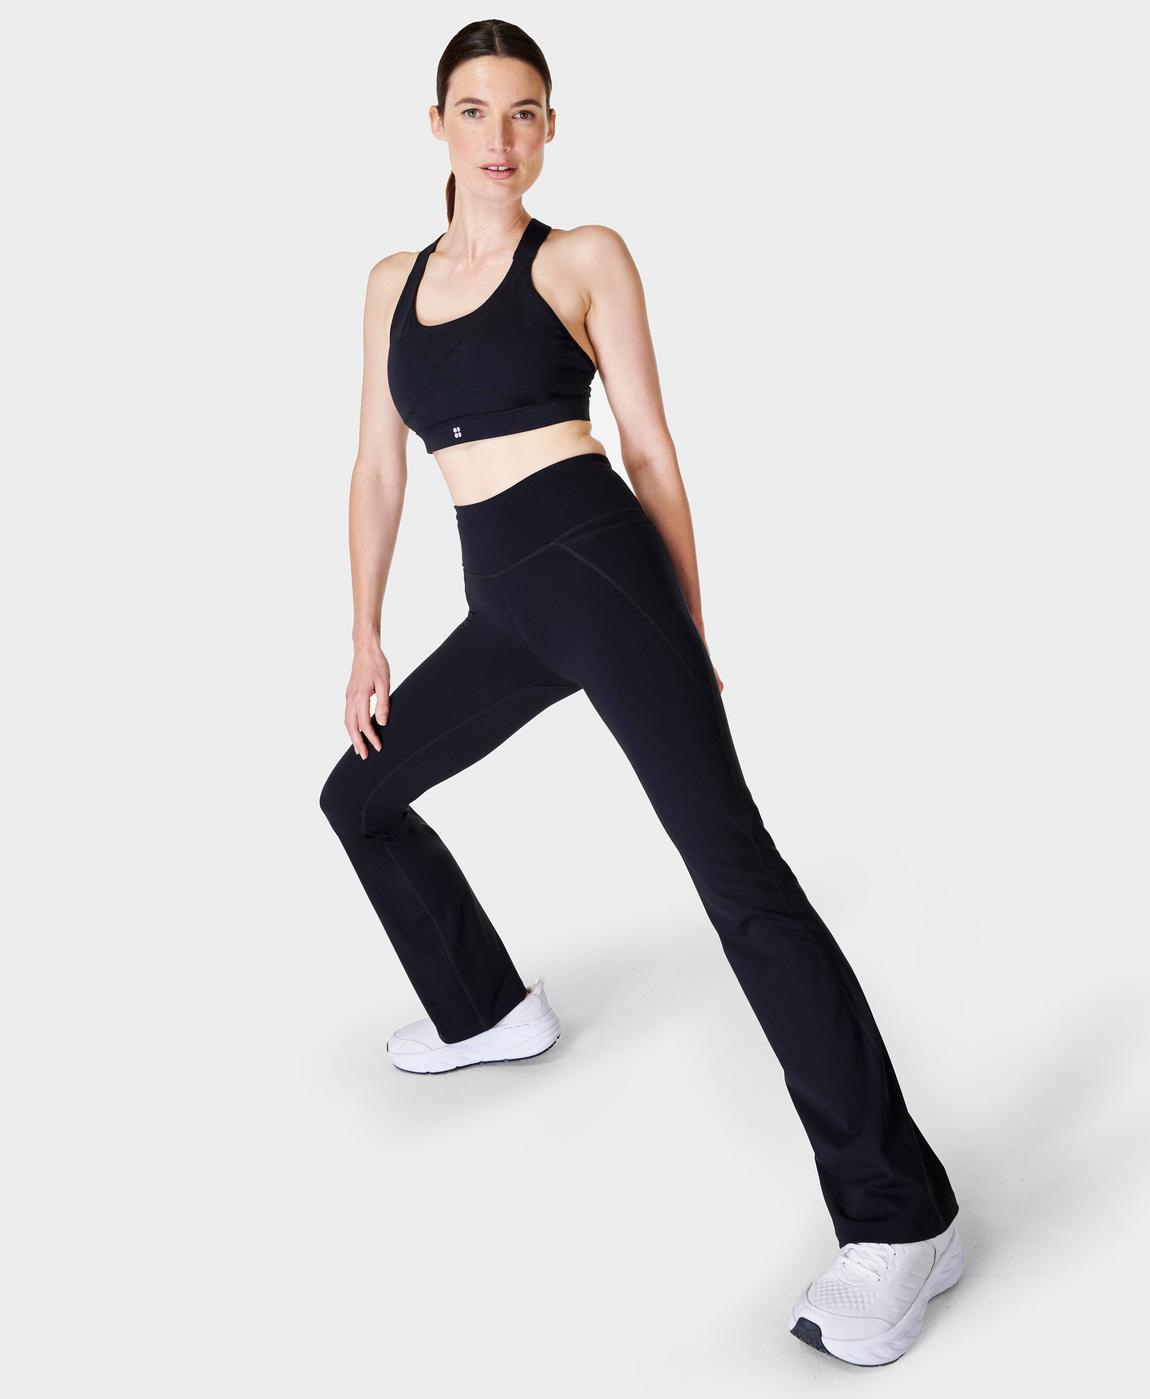 Women's Low-Rise Bootcut Yoga Pants with Pockets Stretch Slim